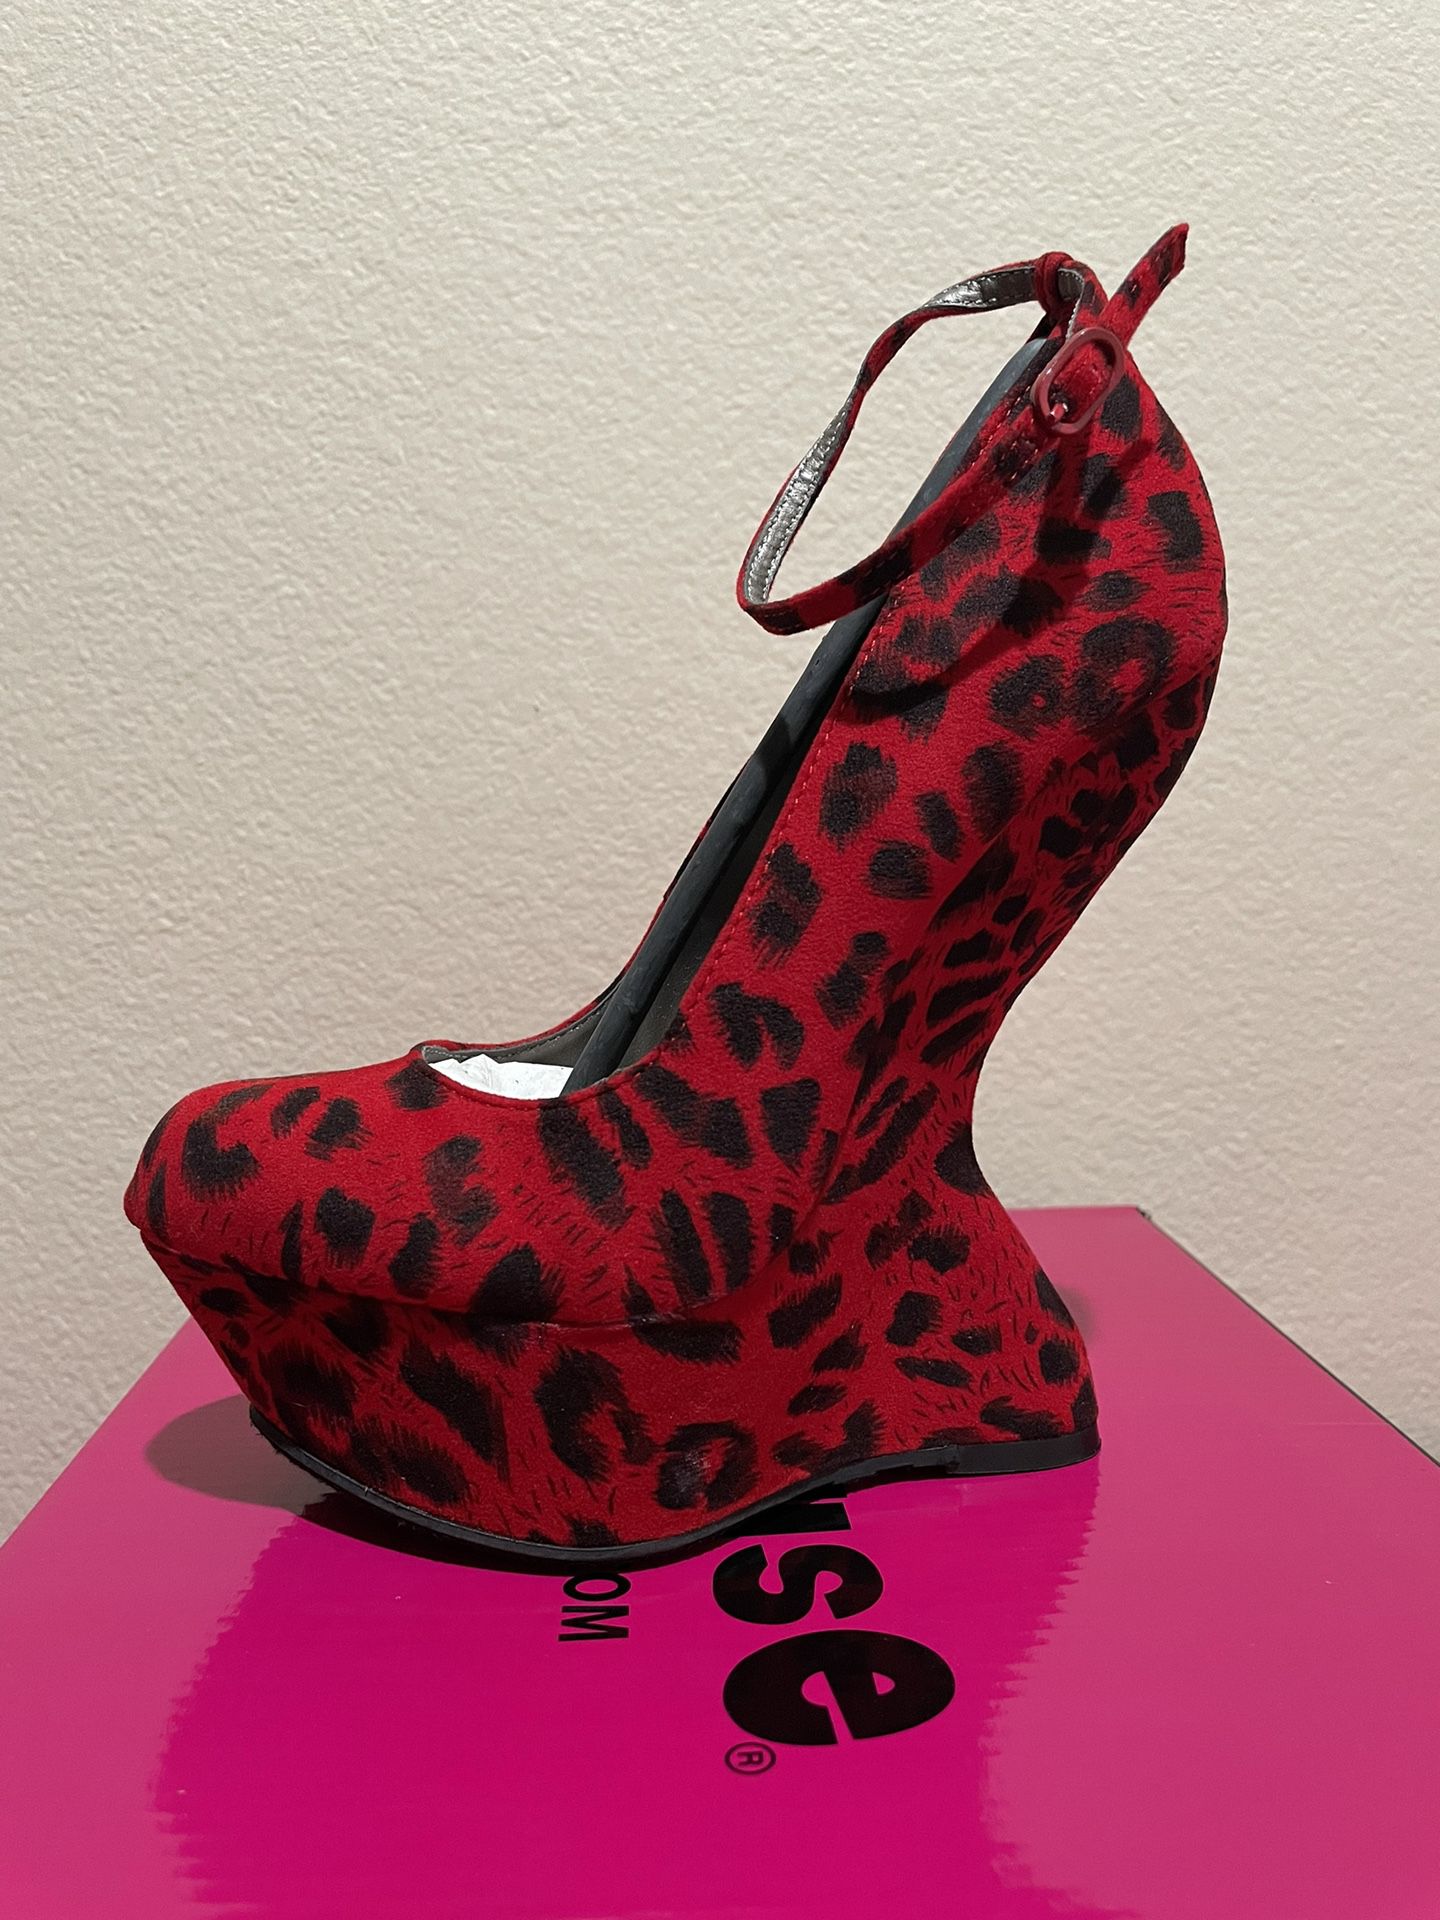 Womens Dollhouse Red Cheetah High Heel Size 5.5, 6, 6.5, 7, 7.5, 8, 8.5, And 9